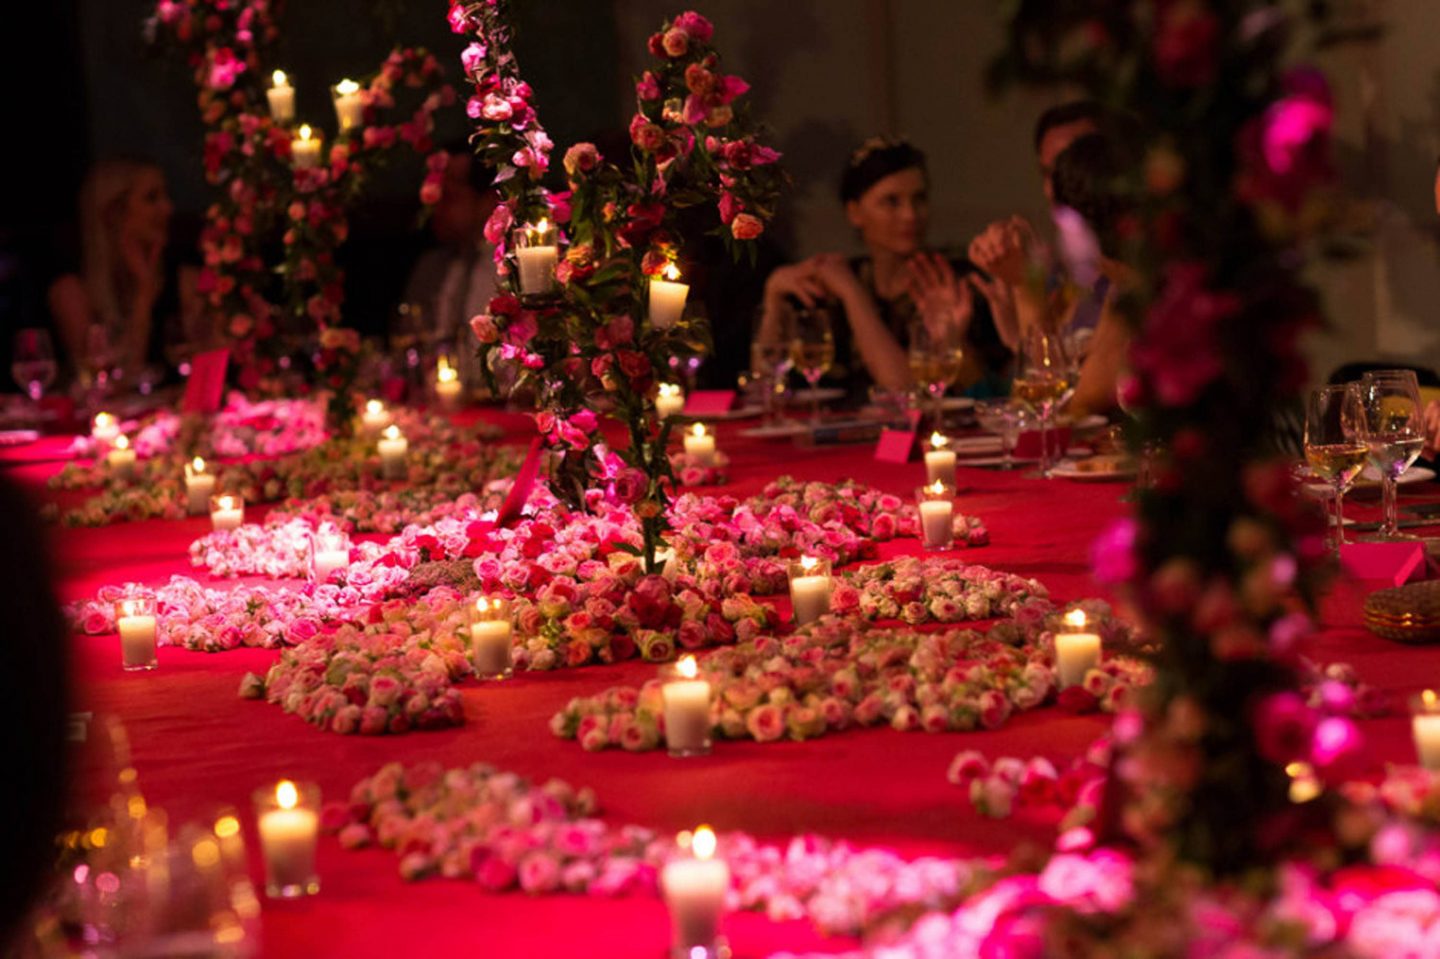 Barchannal shabbat dinner party at this Dubrovnik Wedding in Croatia | Photo by Robert Fairer